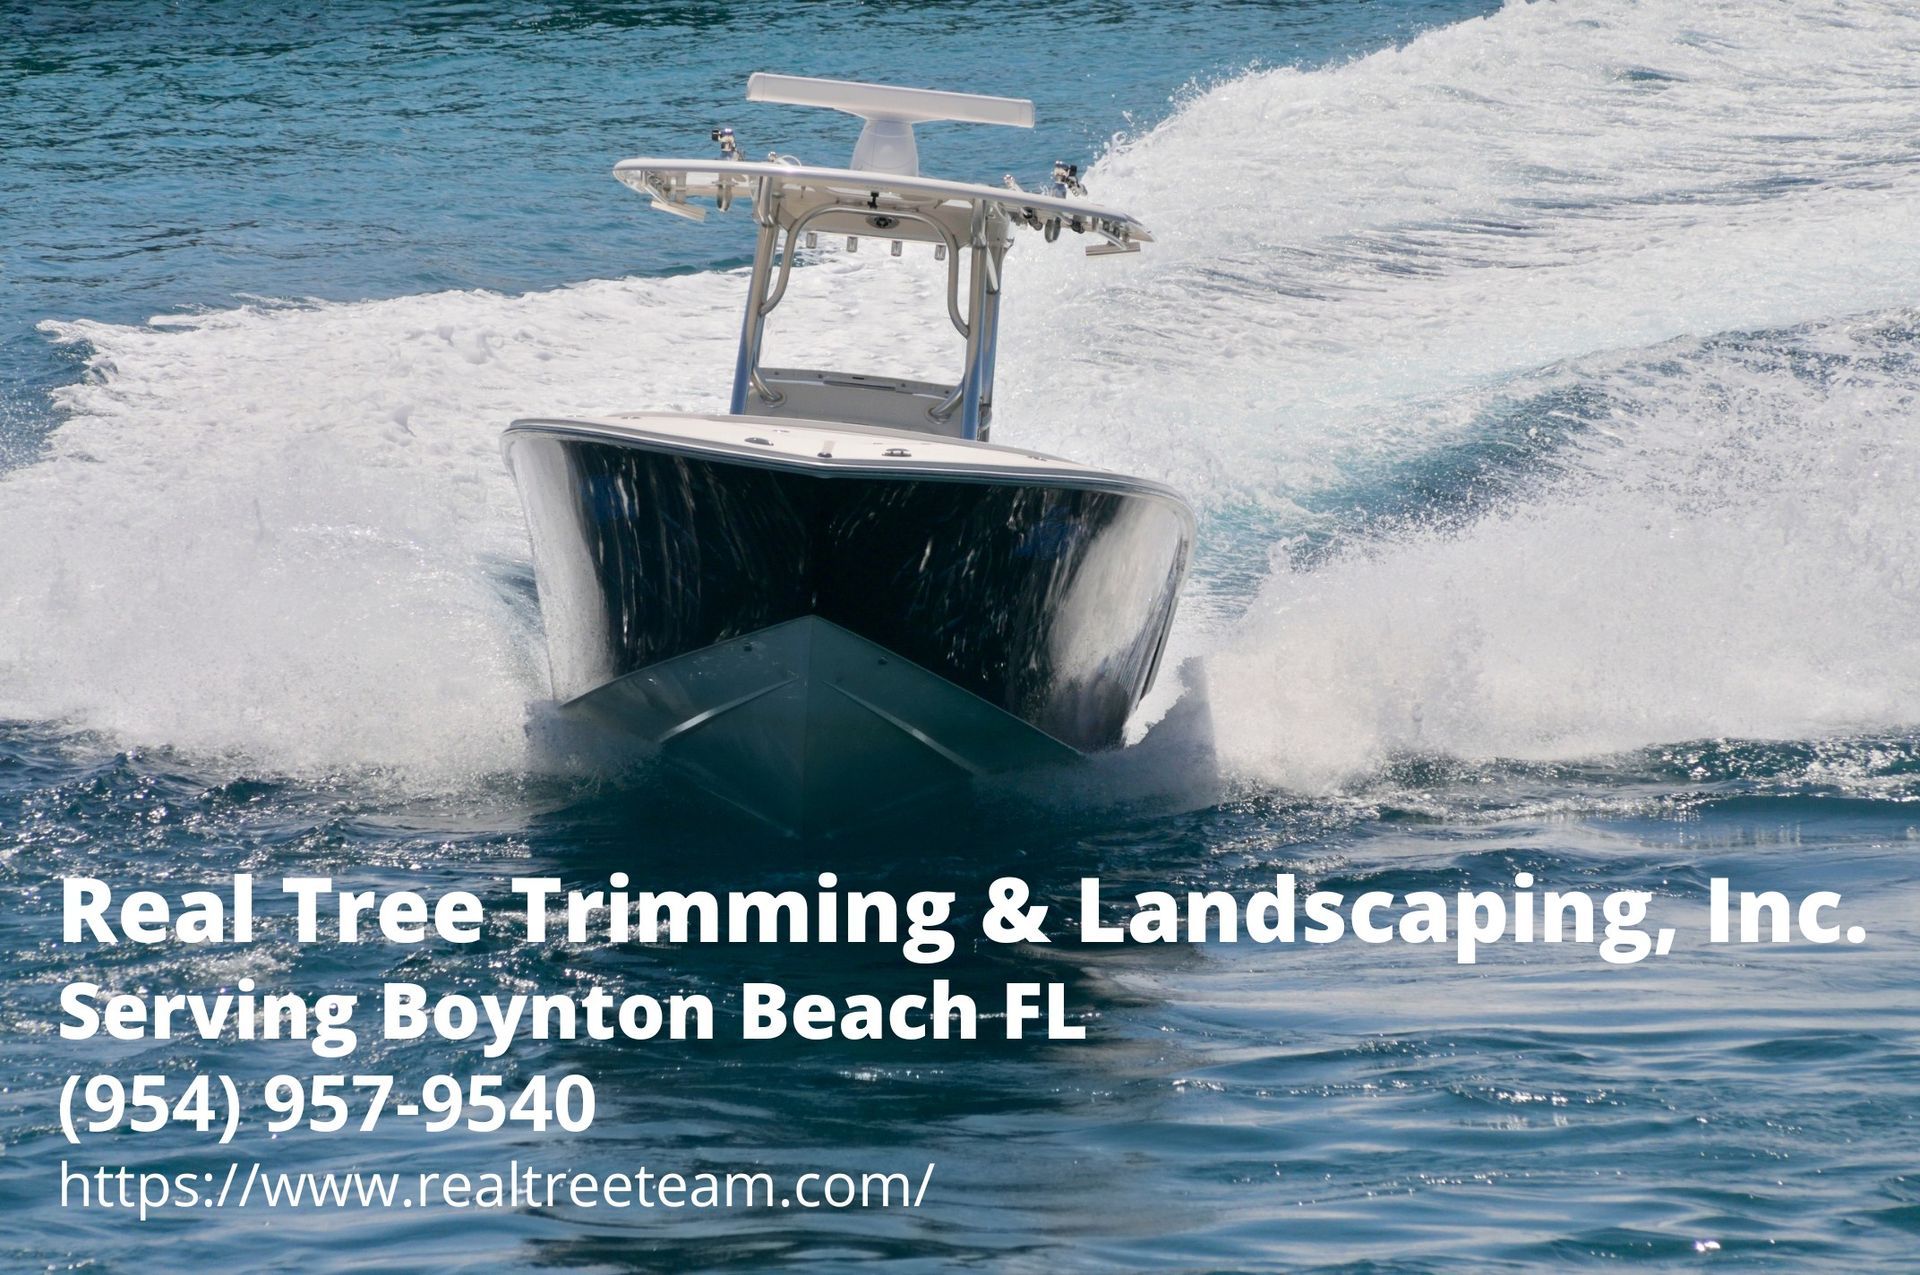 fishing in Boynton Beach inlet featuring the contact info of Real Tree Trimming & Landscaping, Inc.